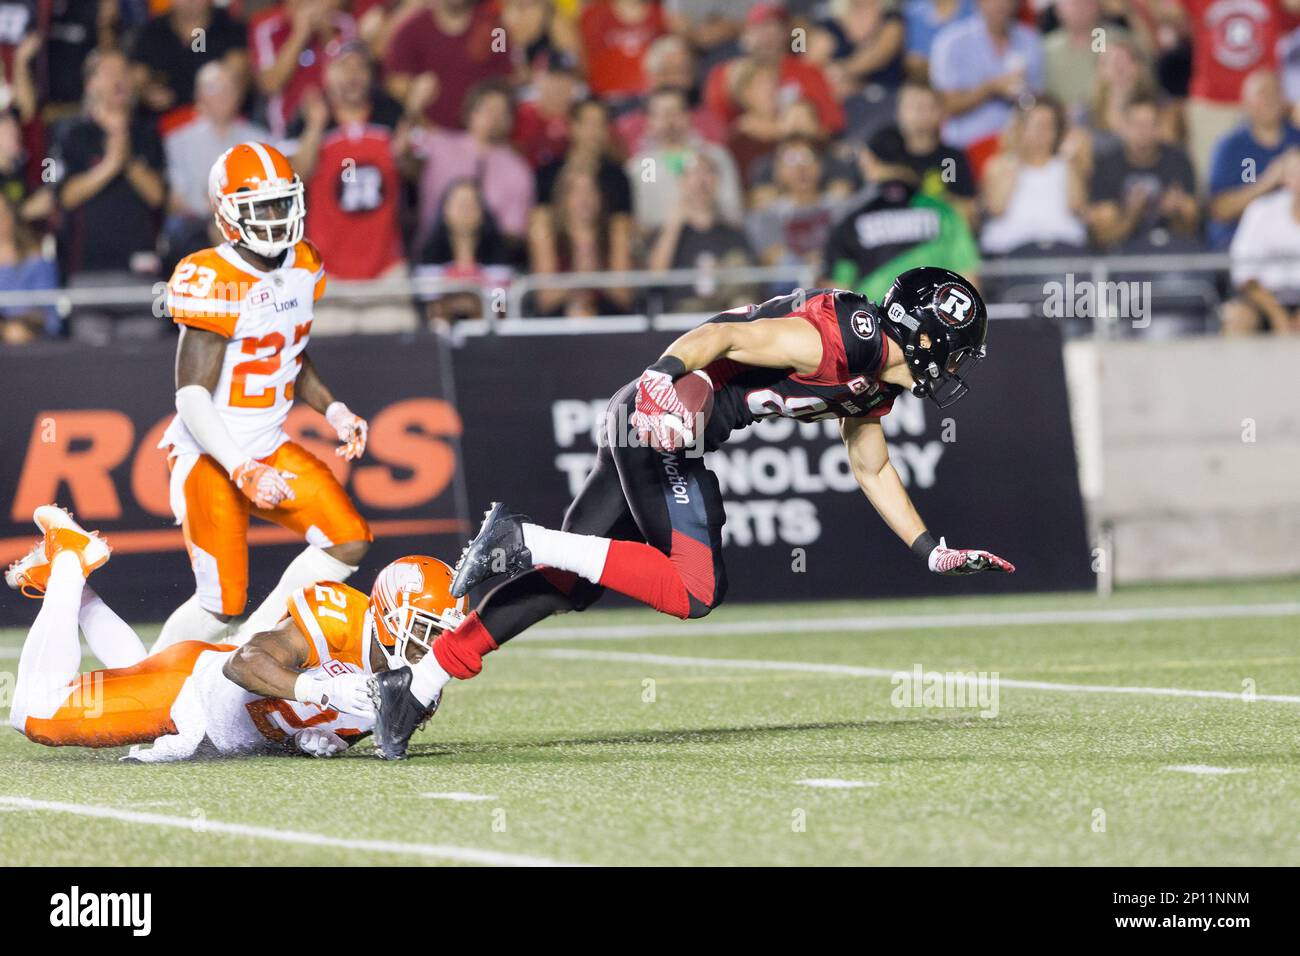 August 25, 2016: BC Lions Ryan Phillips (21) makes a shoestring